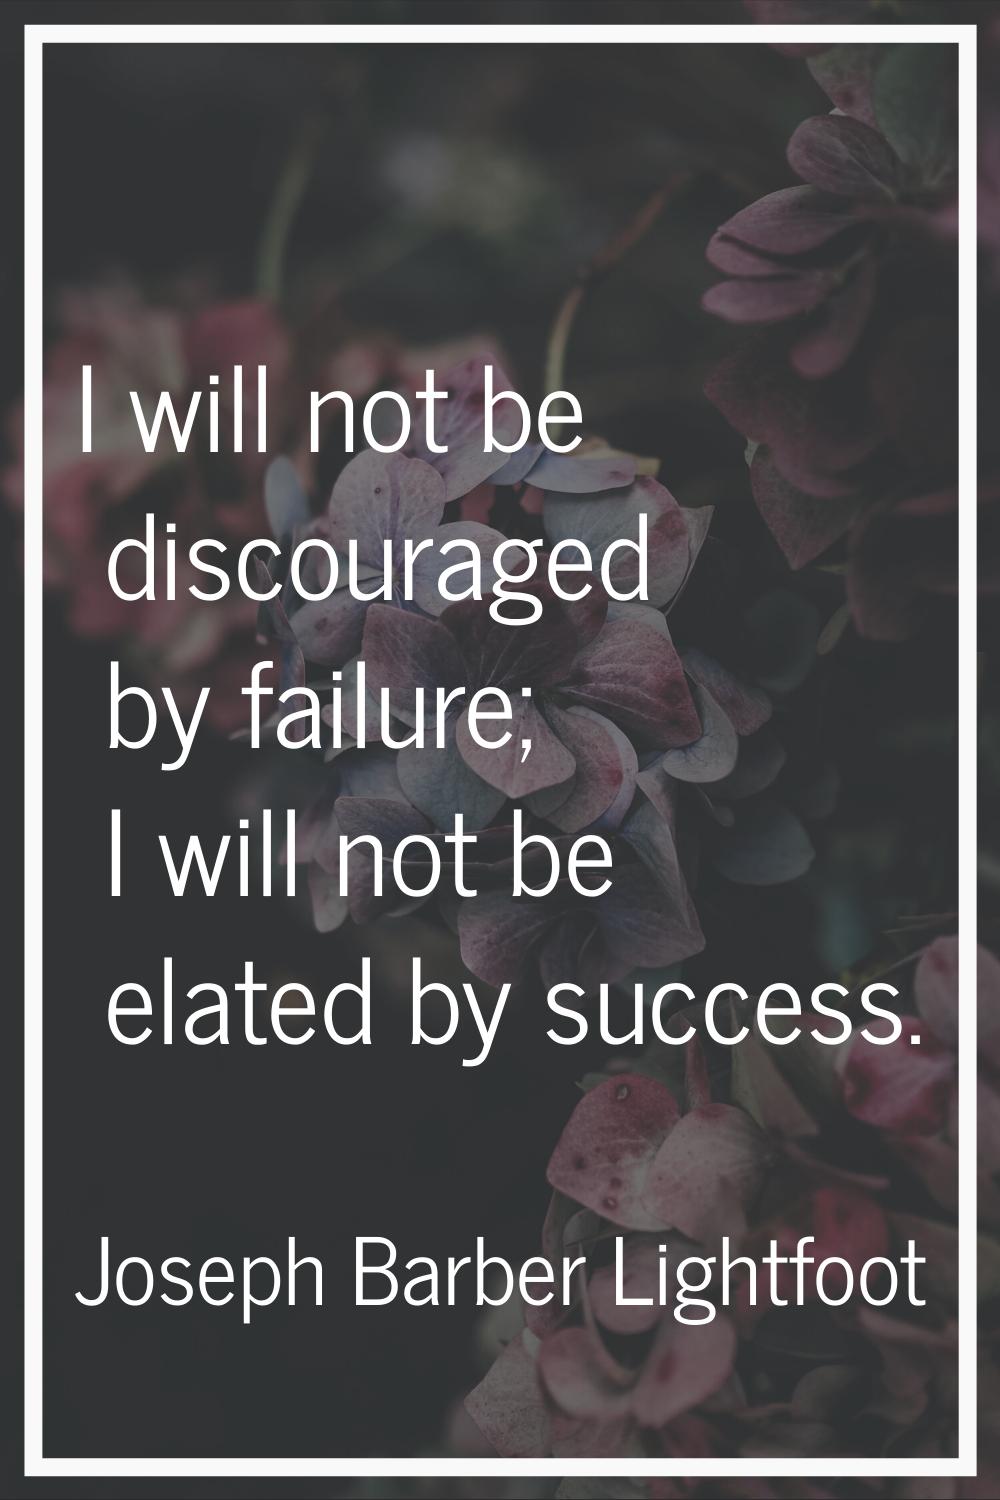 I will not be discouraged by failure; I will not be elated by success.